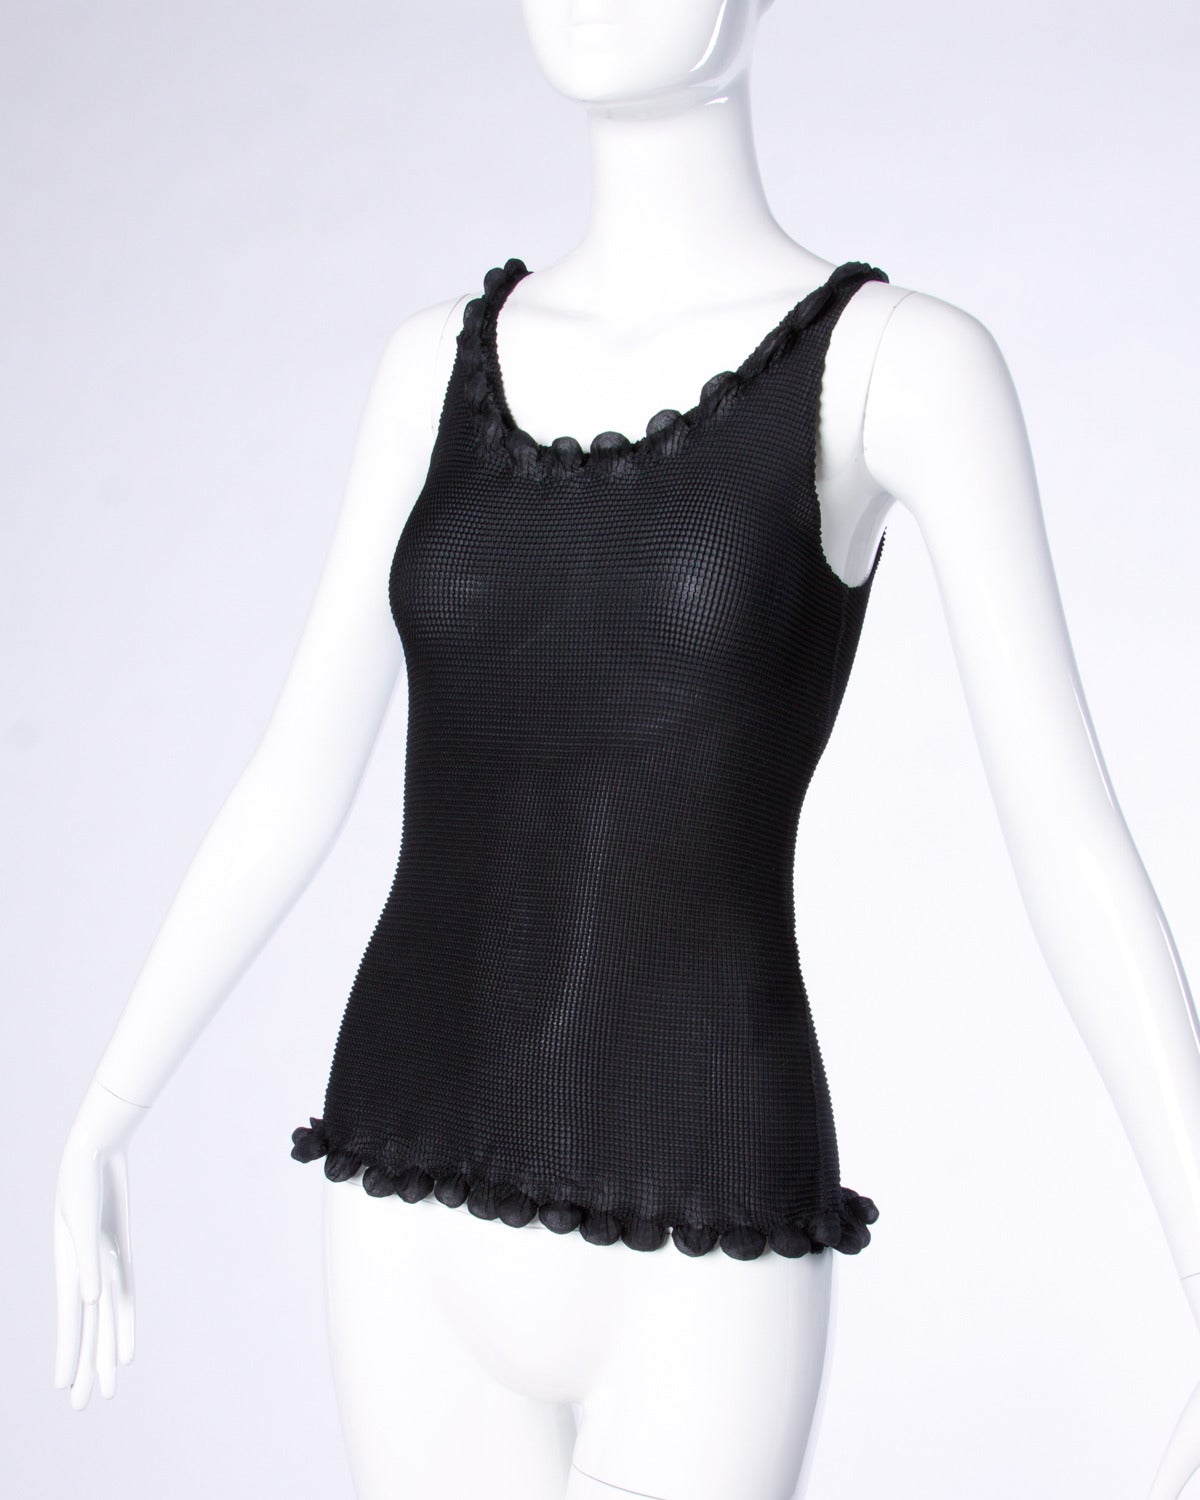 Me by Issey Miyake sculptural black silk tank top with pleats.

Details:

Unlined
No Closure
Marked Size: Not Marked
Estimated Size: S-M
Color: Black
Fabric: Feels like Silk
Label: Me by Issey Miyake

Measurements:

Bust: 28